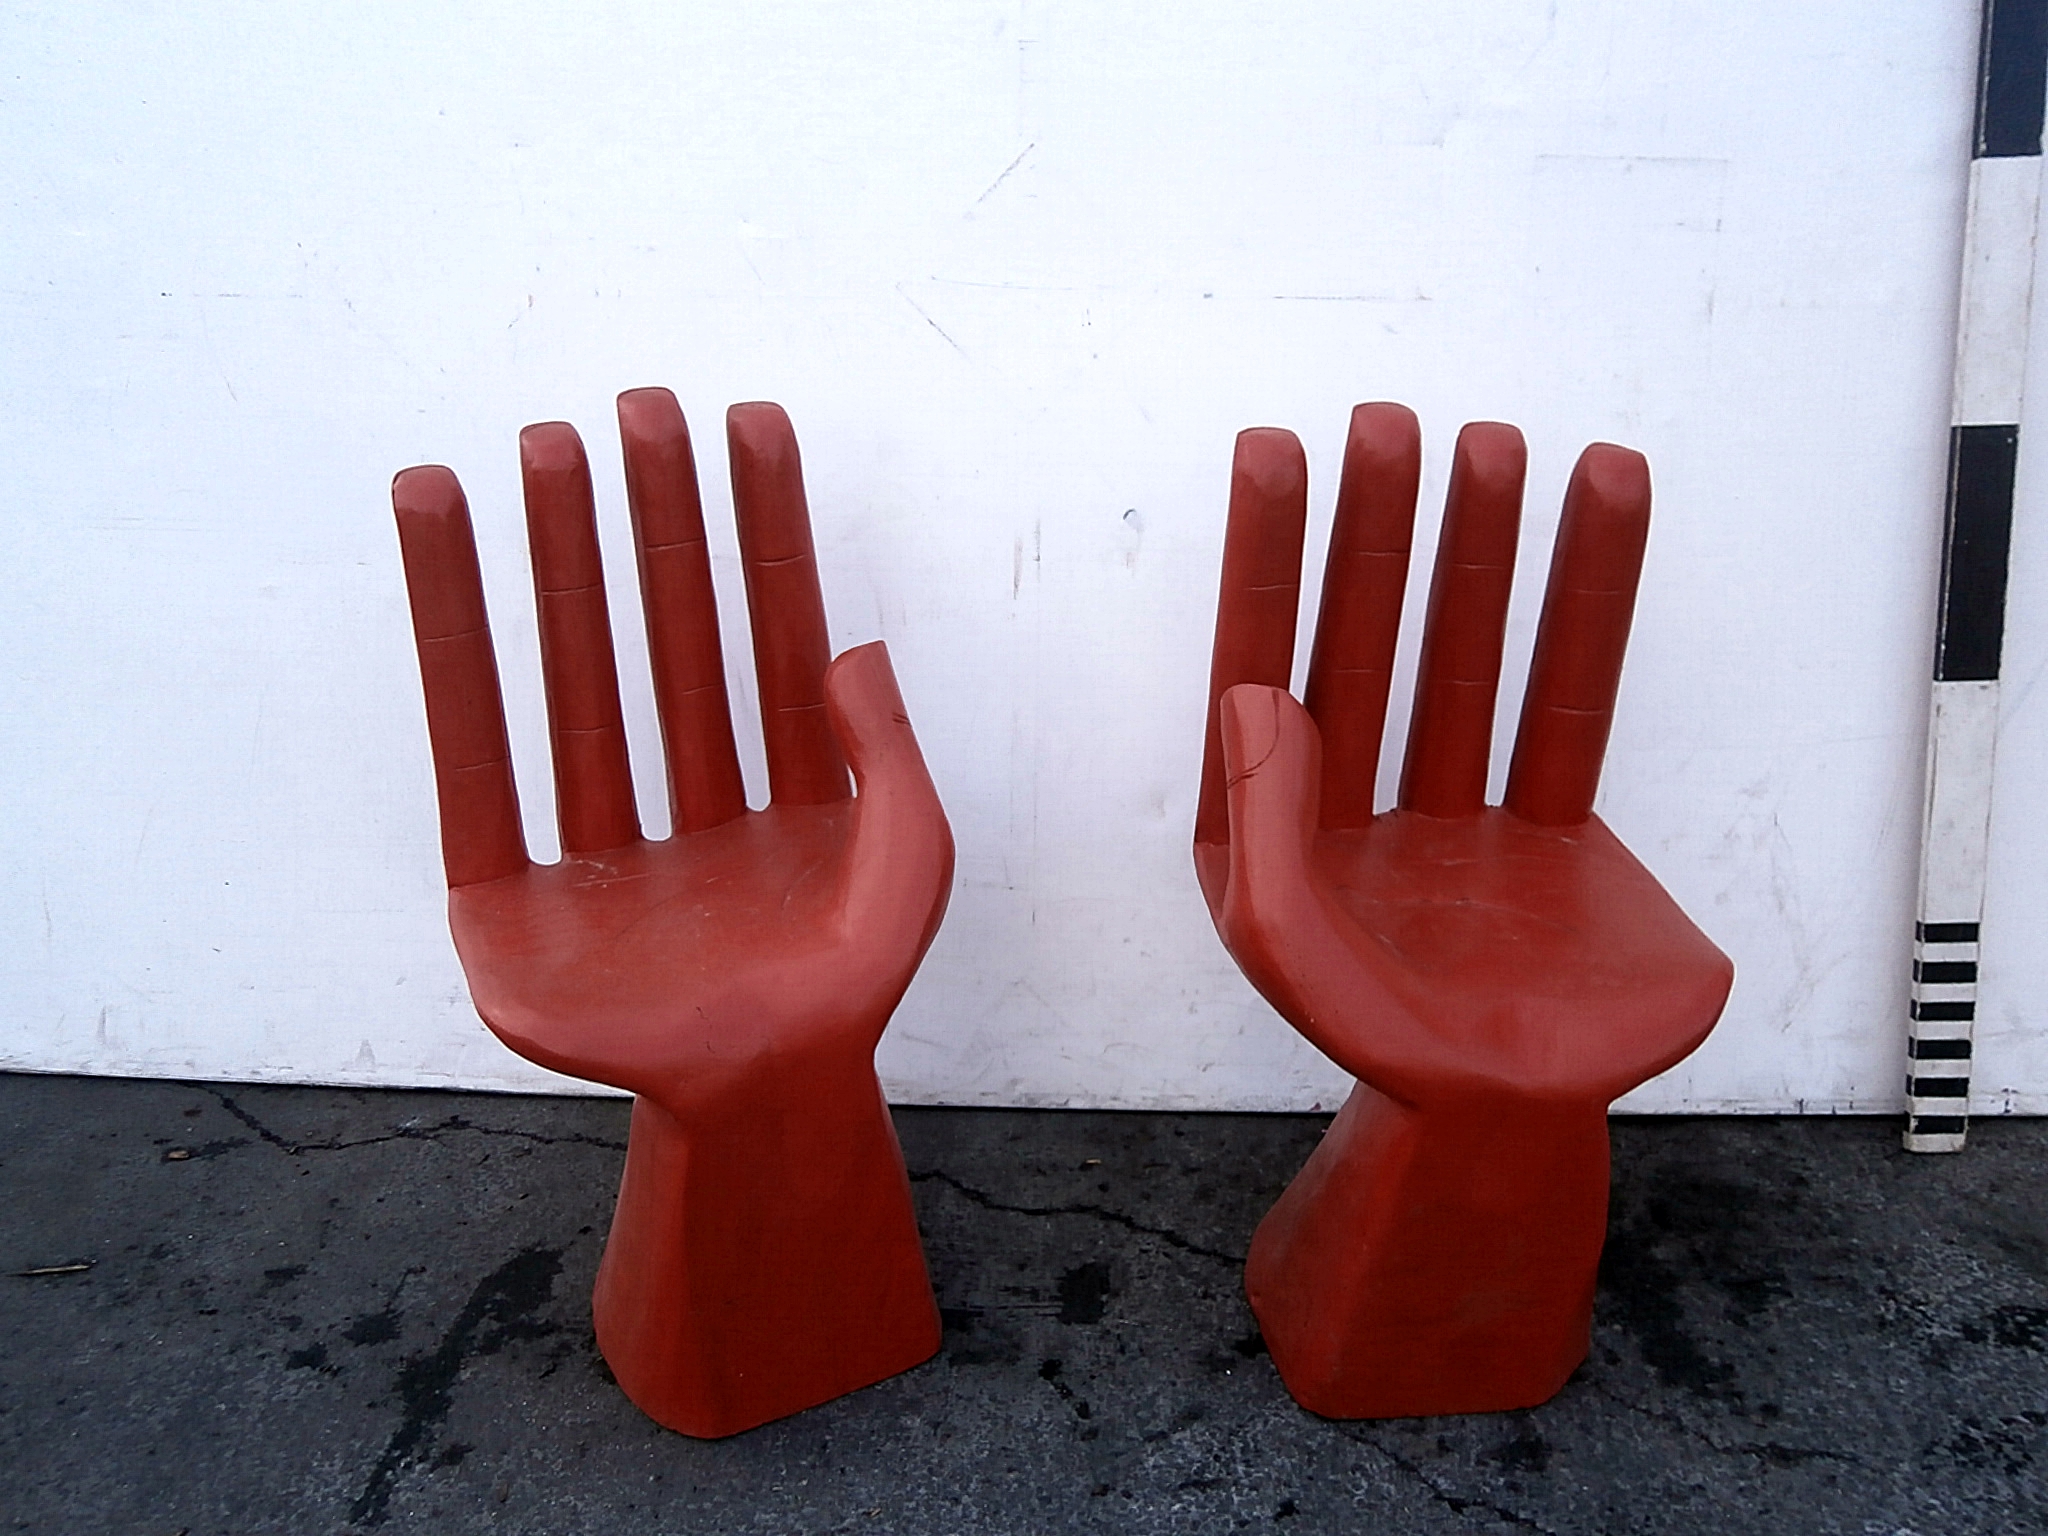  Hand Shaped Chair